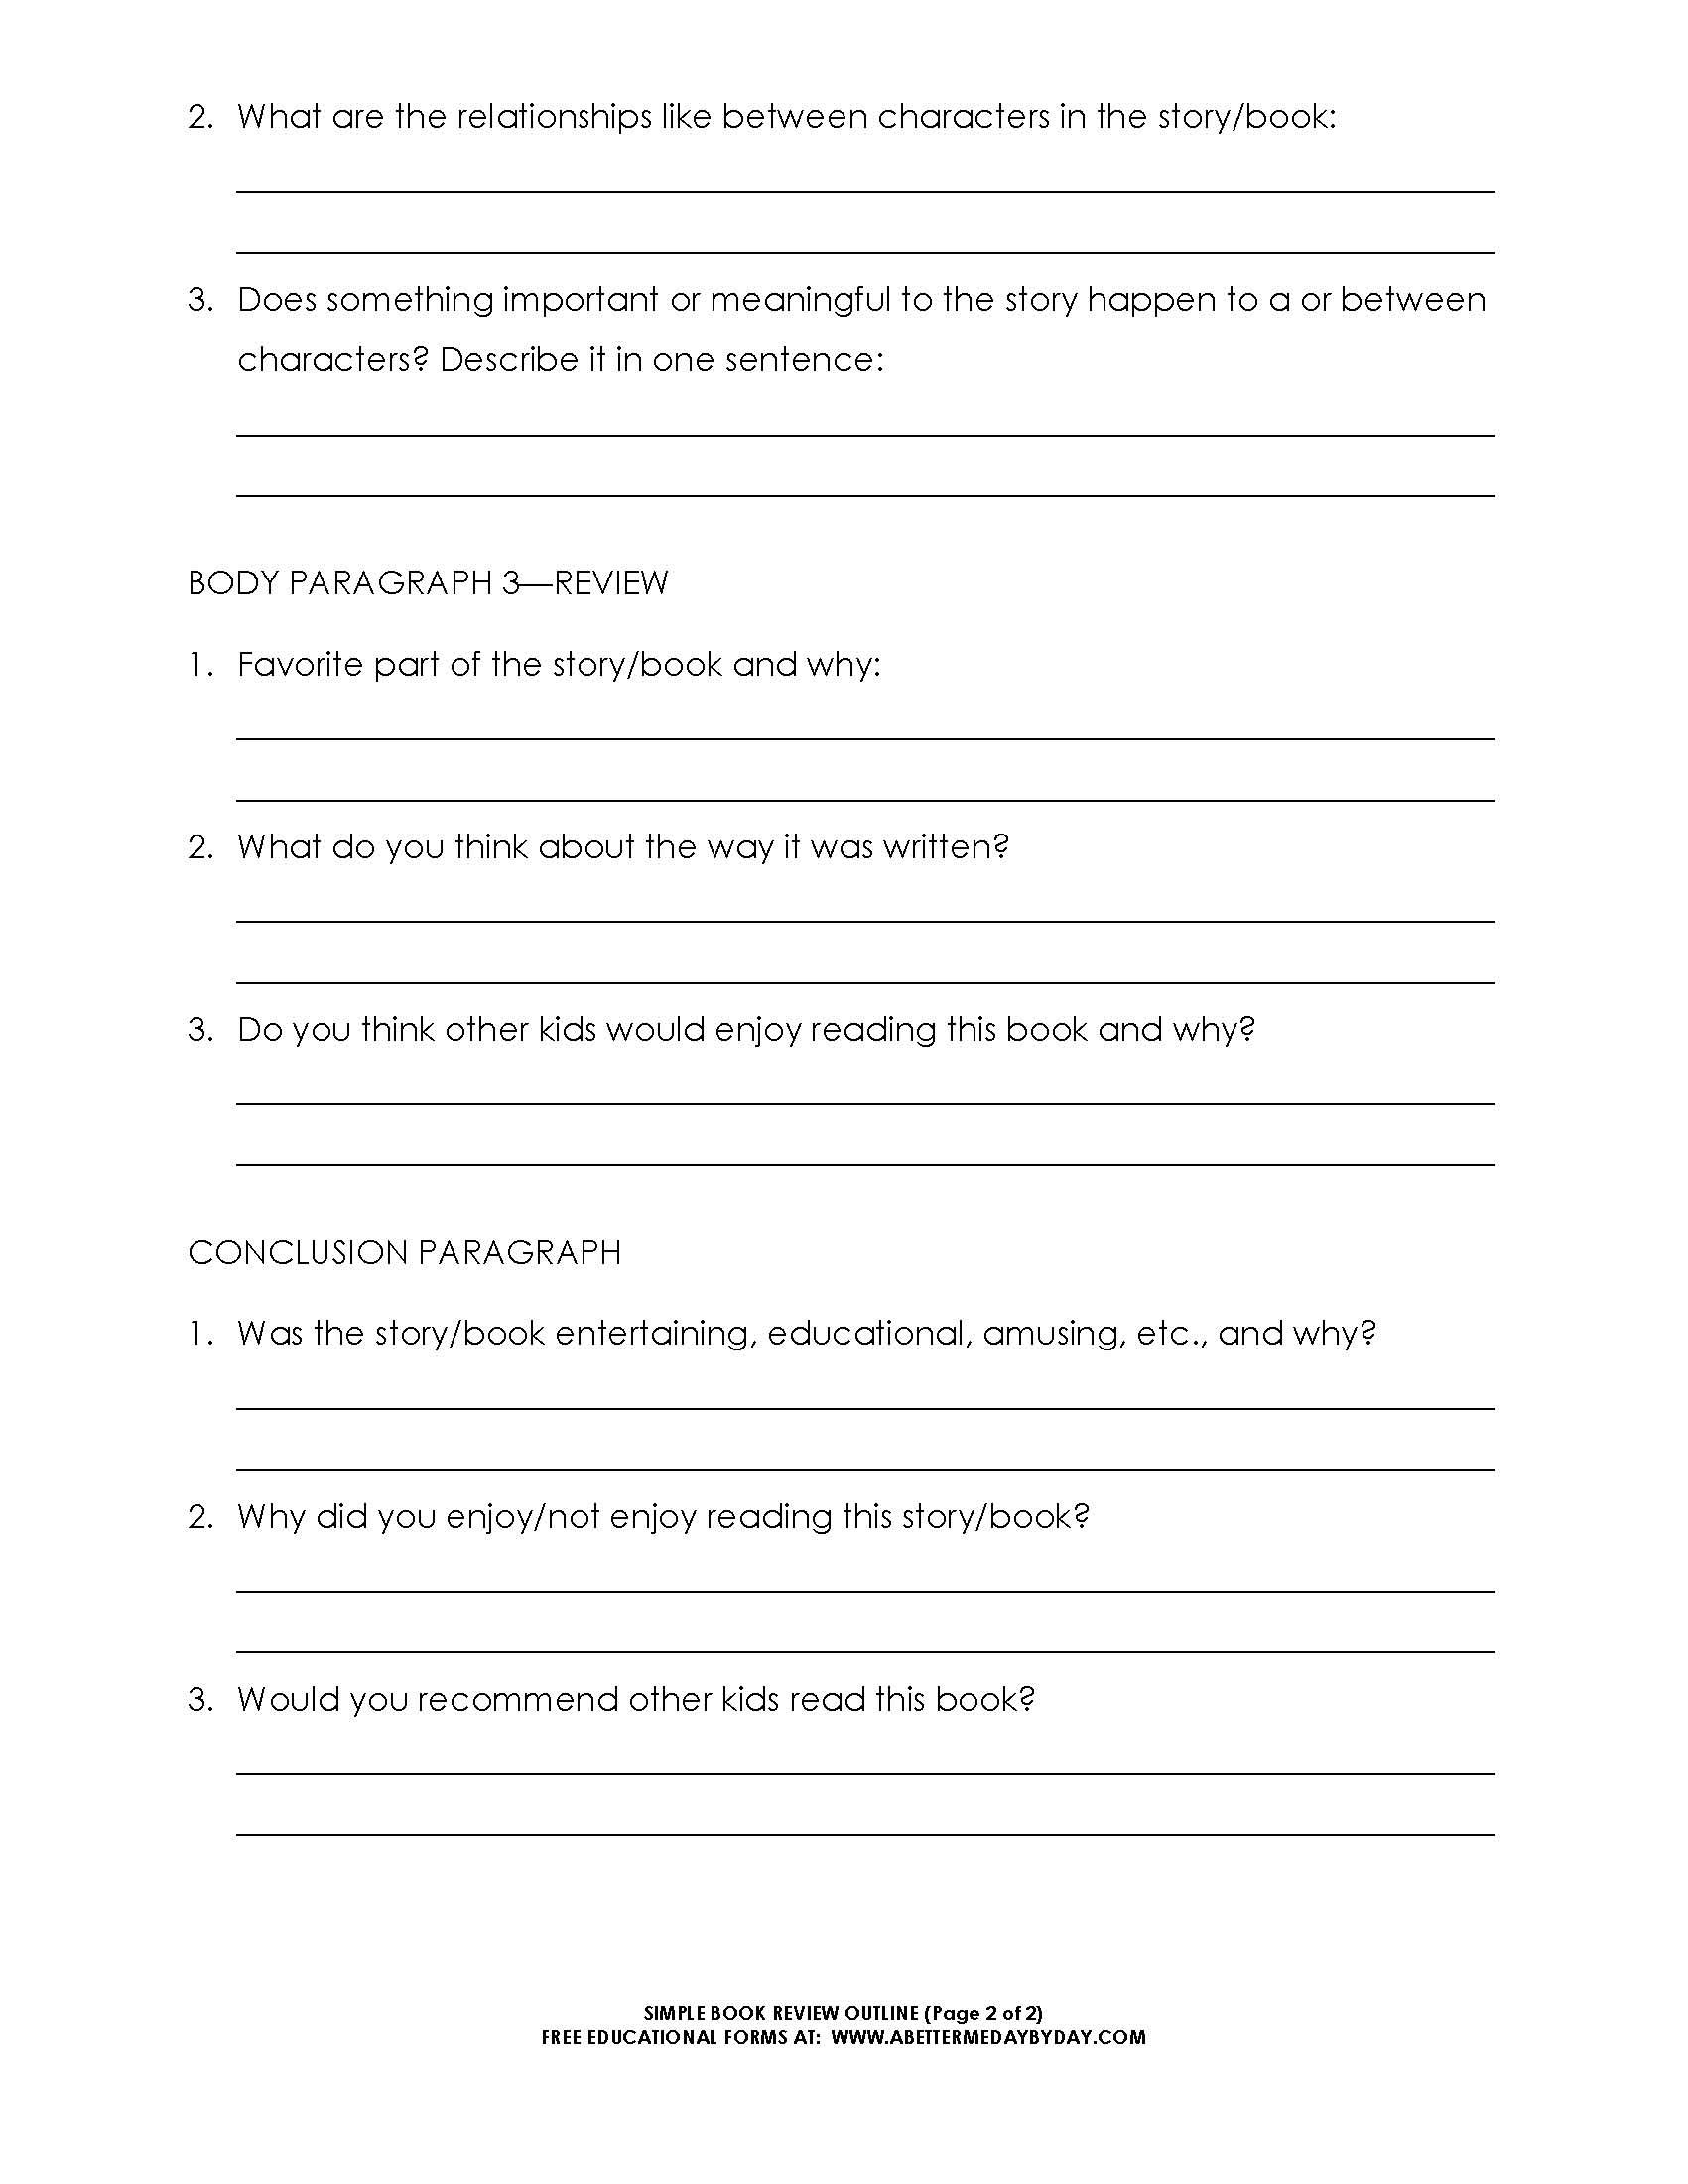 Free: Simple 5 Paragraph Book Review Or Report Outline Form For College Book Report Template